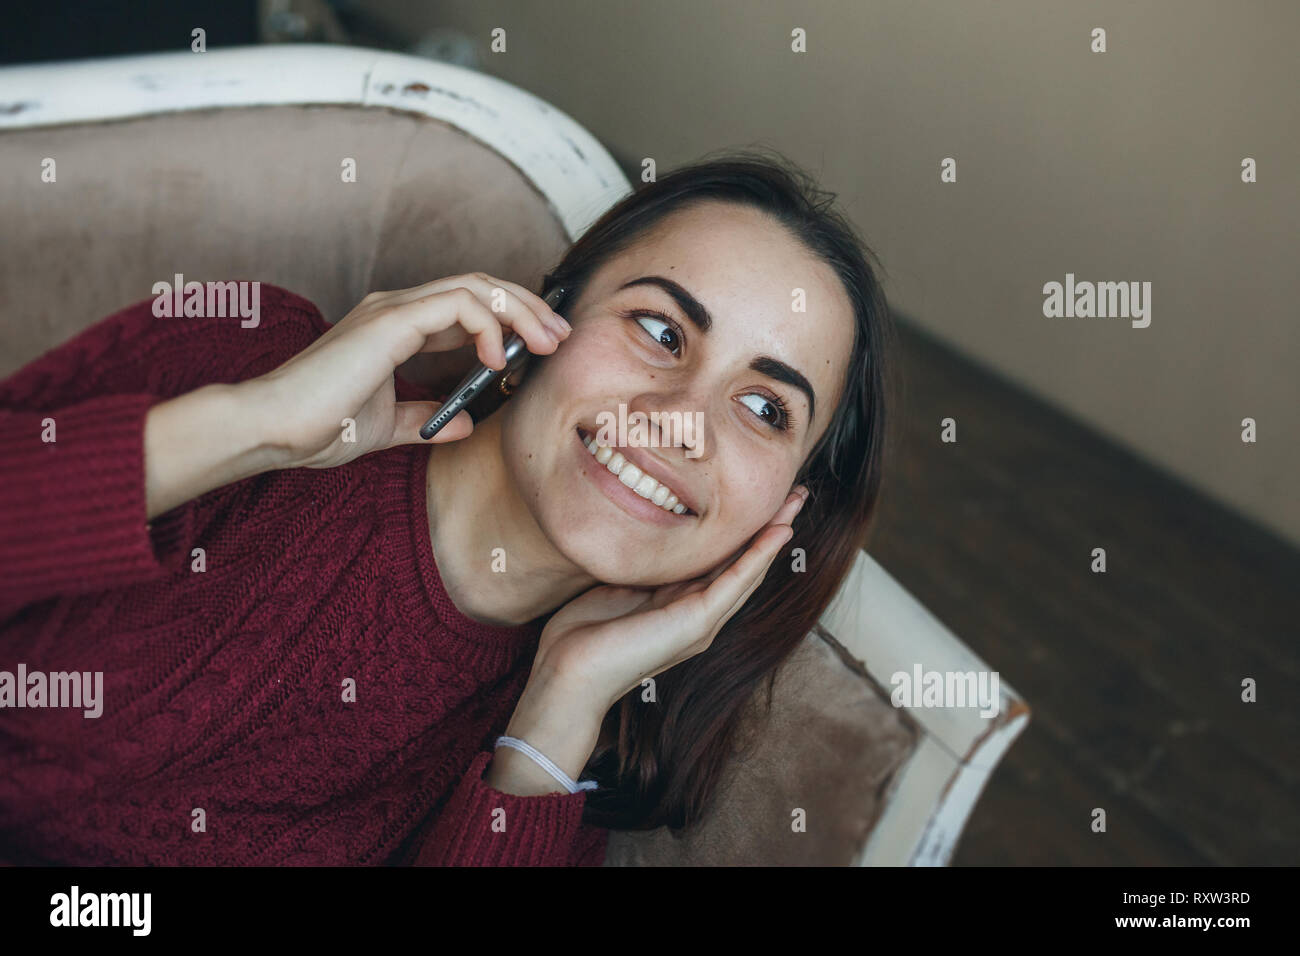 Portrait of young smiling Woman talking on mobile phone on sofa at home. Banque D'Images